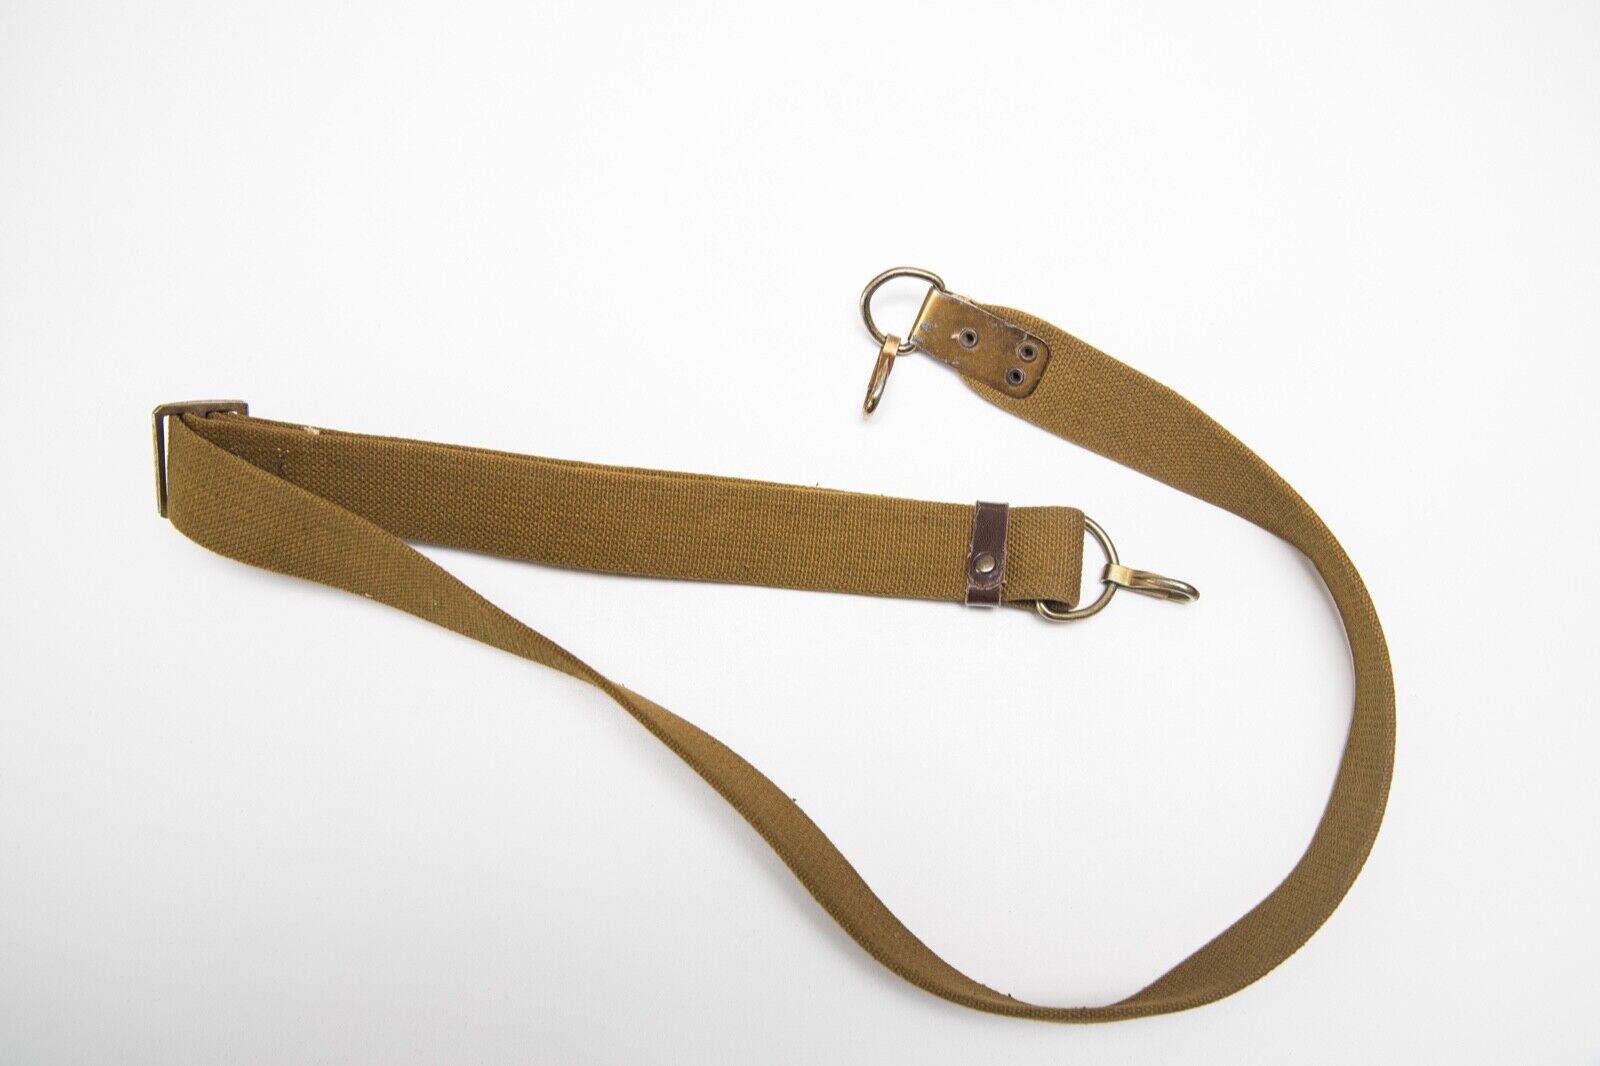 Original Russian double hooked canvas sling for sporting and hunting.